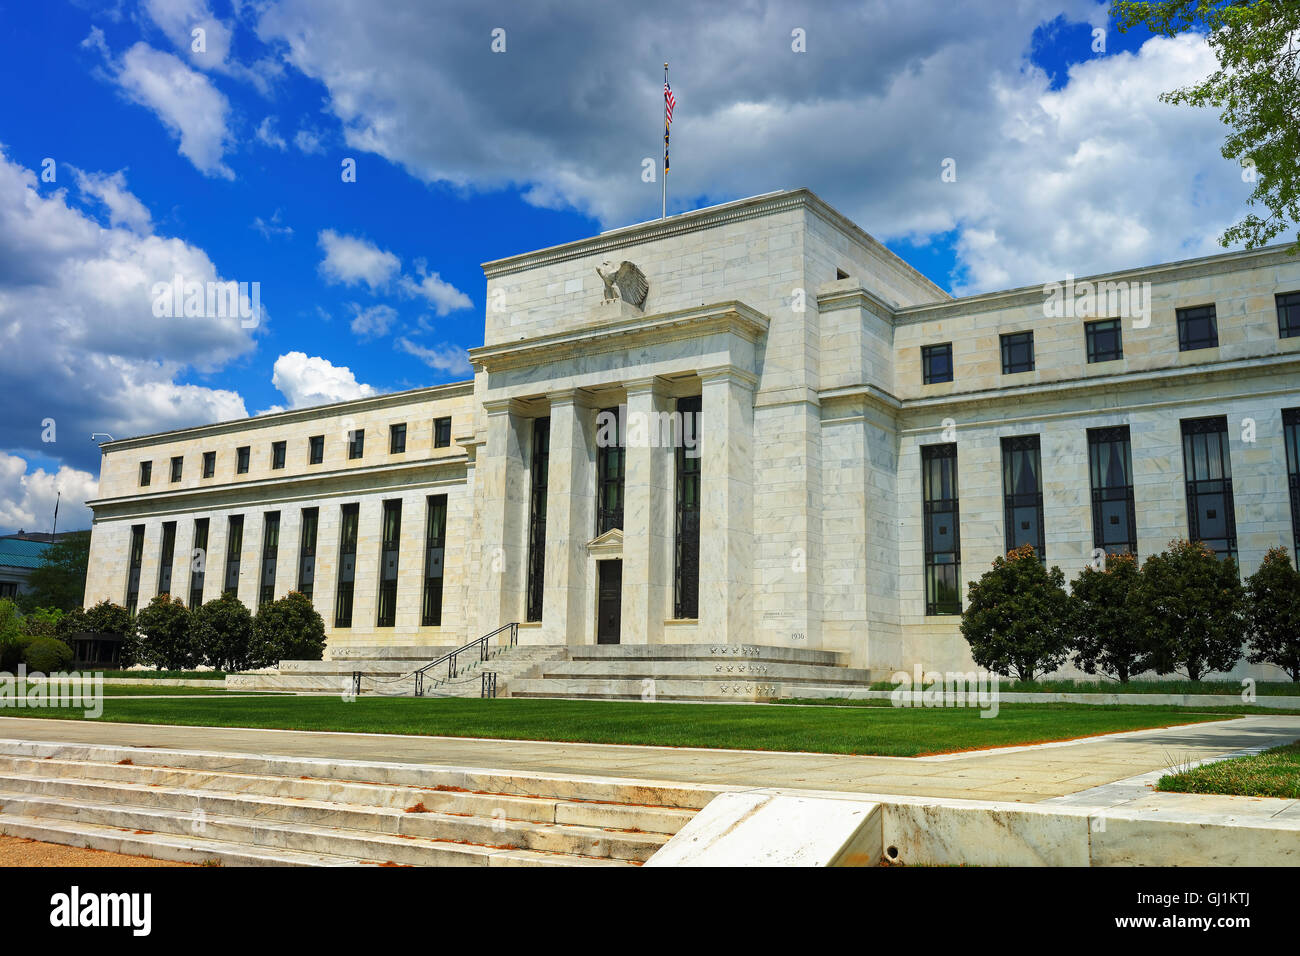 Marriner S. Eccles Federal Reserve Board Building, befindet sich in Washington D.C., USA. Es ist der Sitz des Board of Governors des Federal Reserve System. Stockfoto